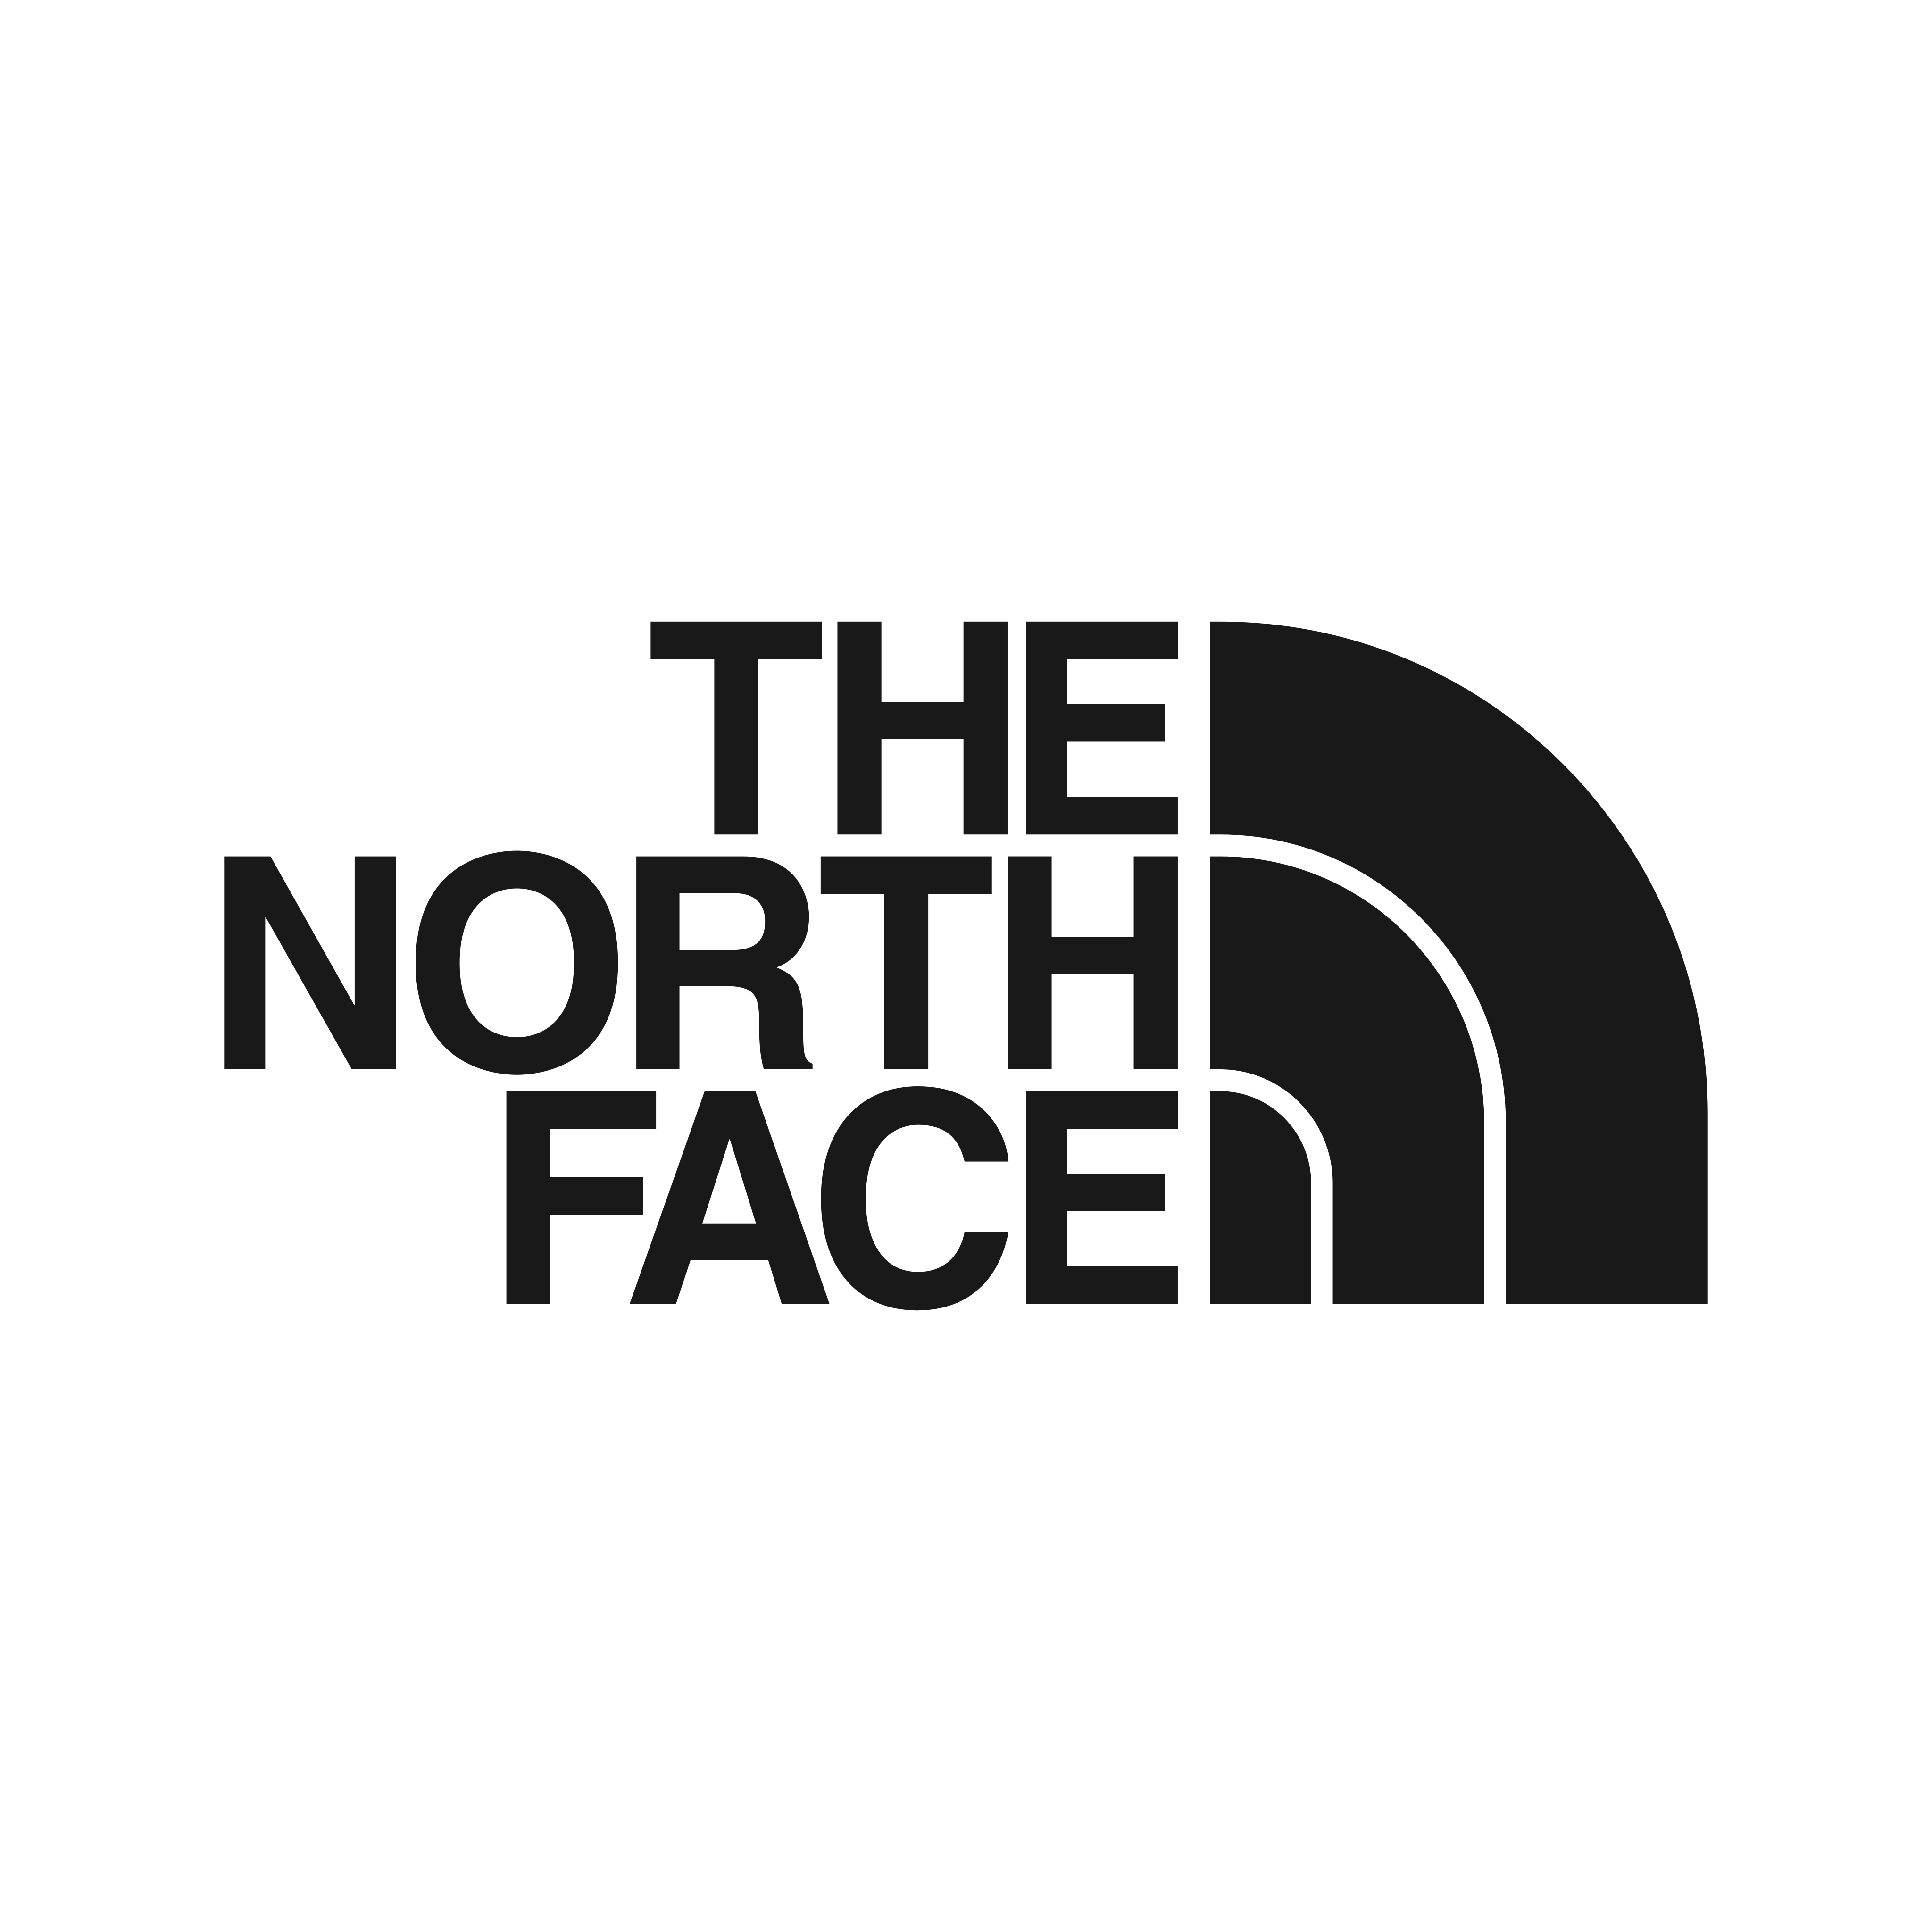 the north face logo 0 - The North Face Logo